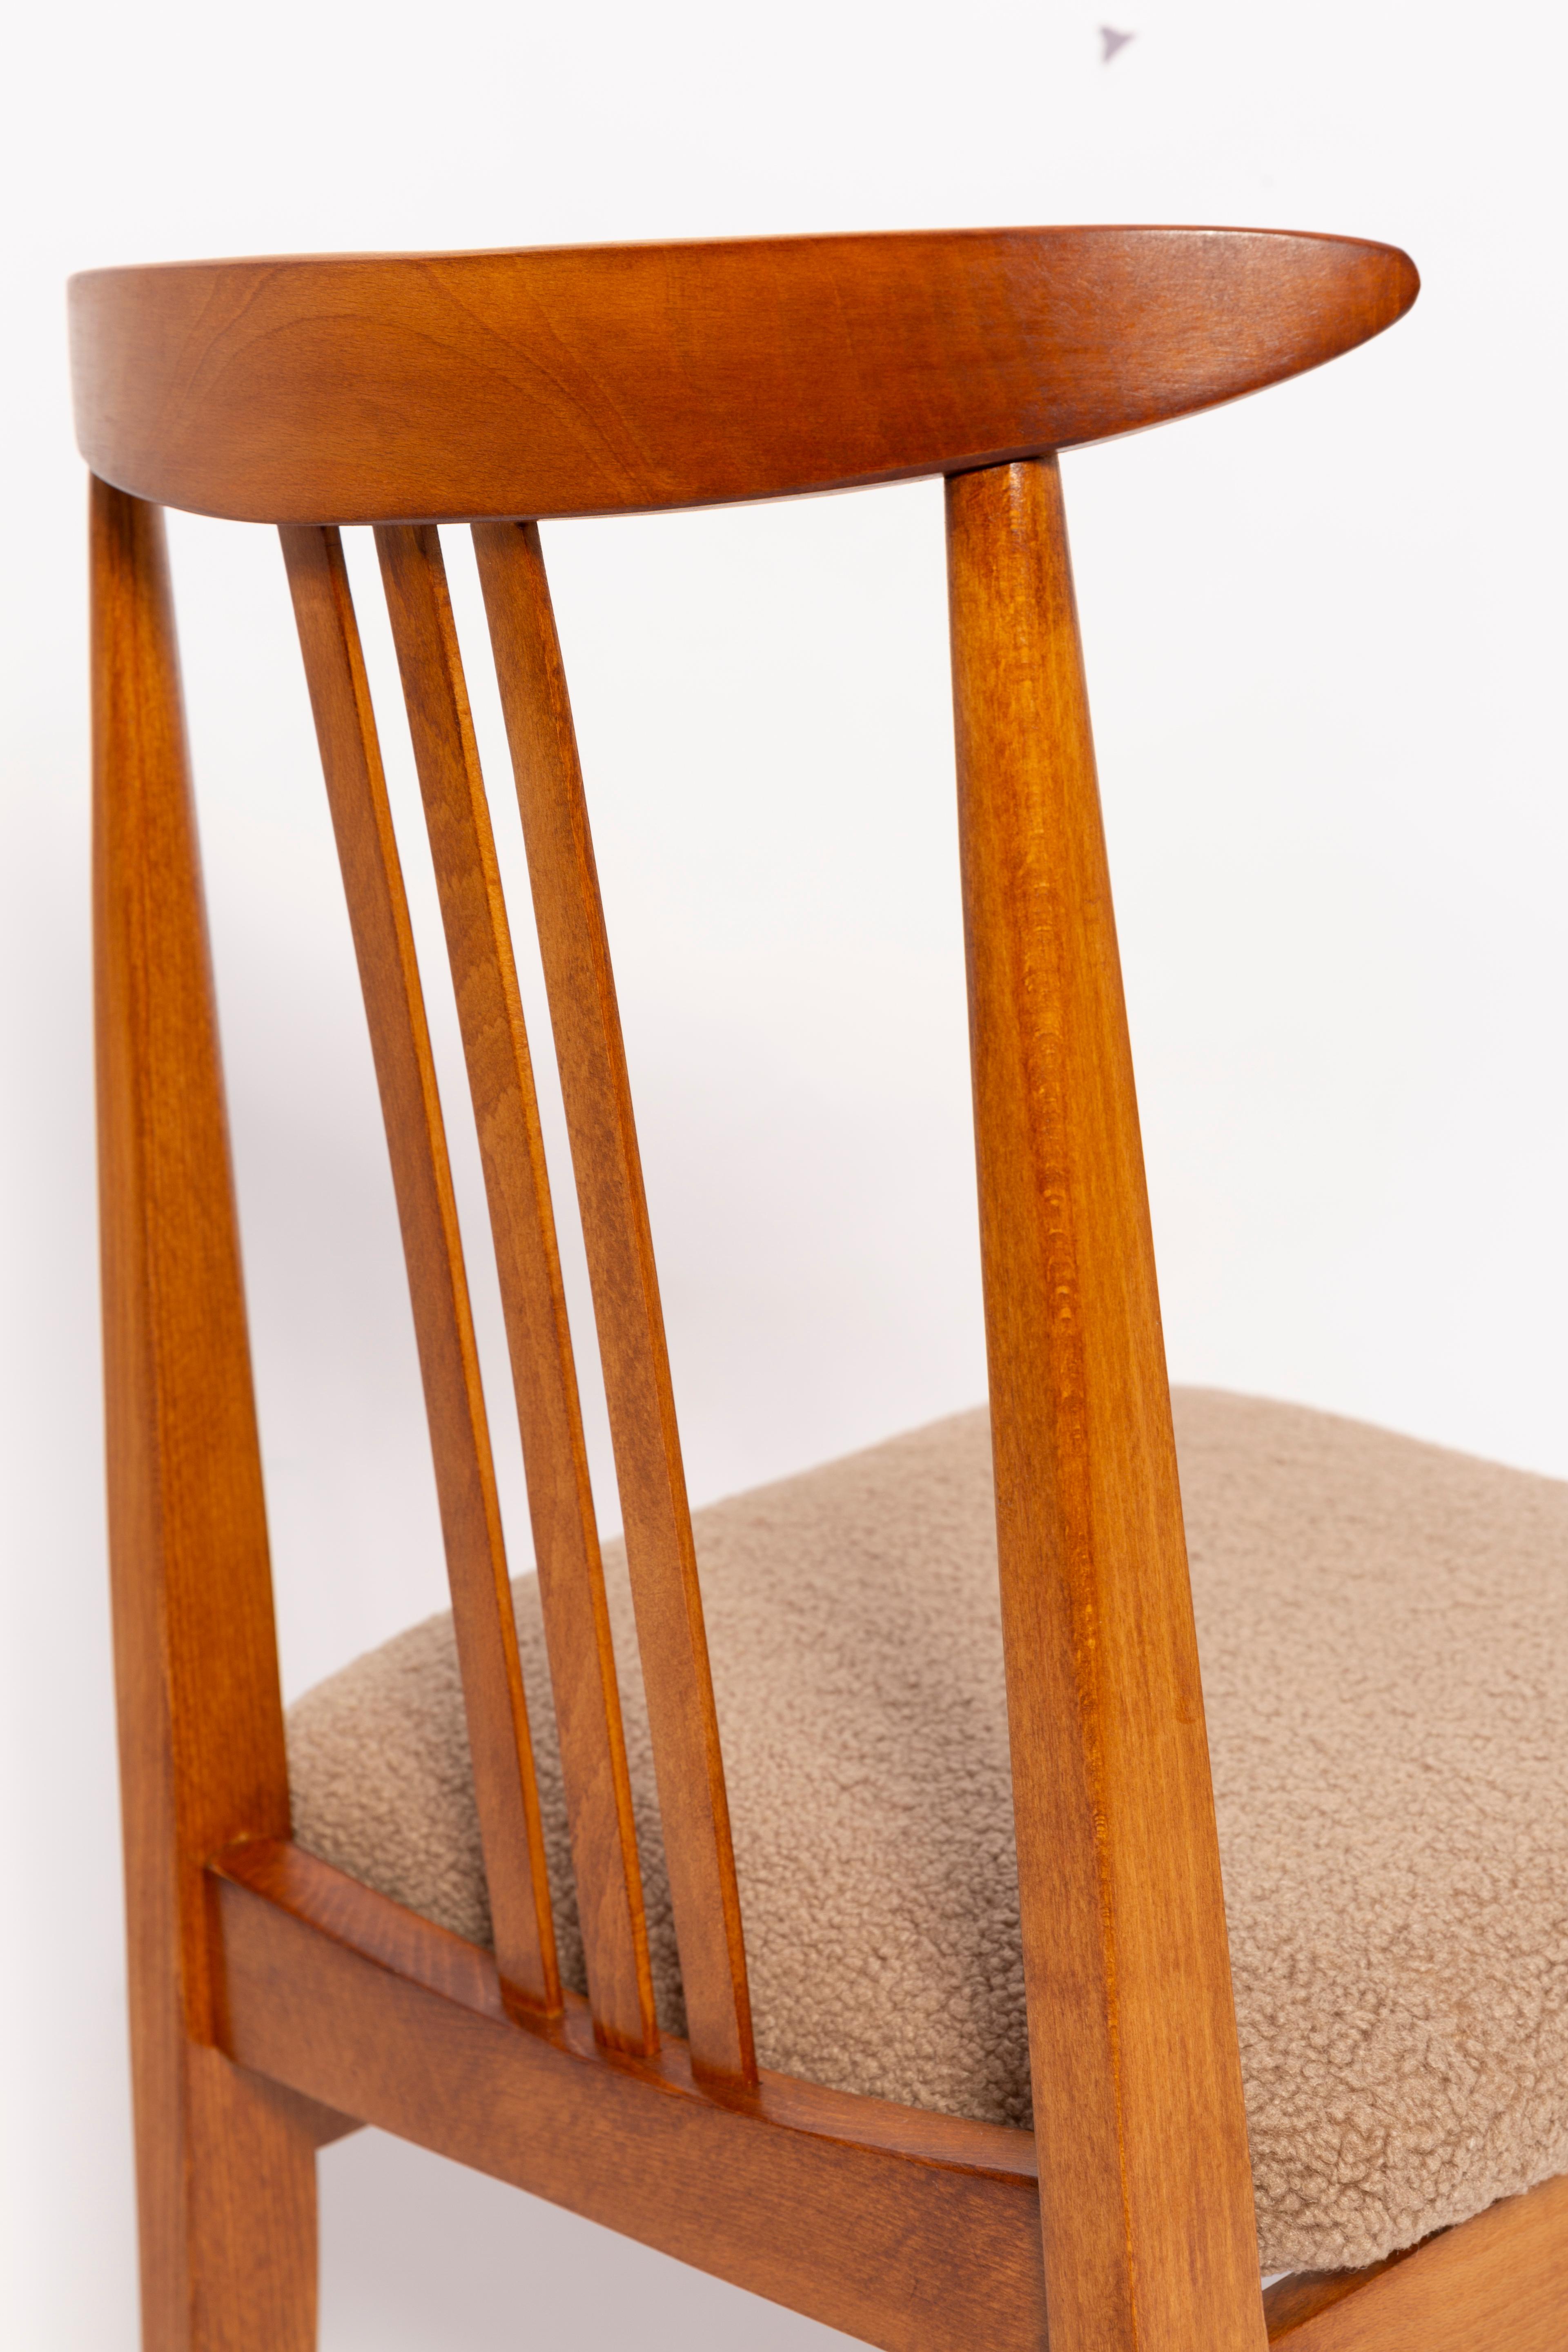 Hand-Crafted Mid-Century Latte Boucle Chair, Medium Wood, M. Zielinski, Europe 1960s For Sale